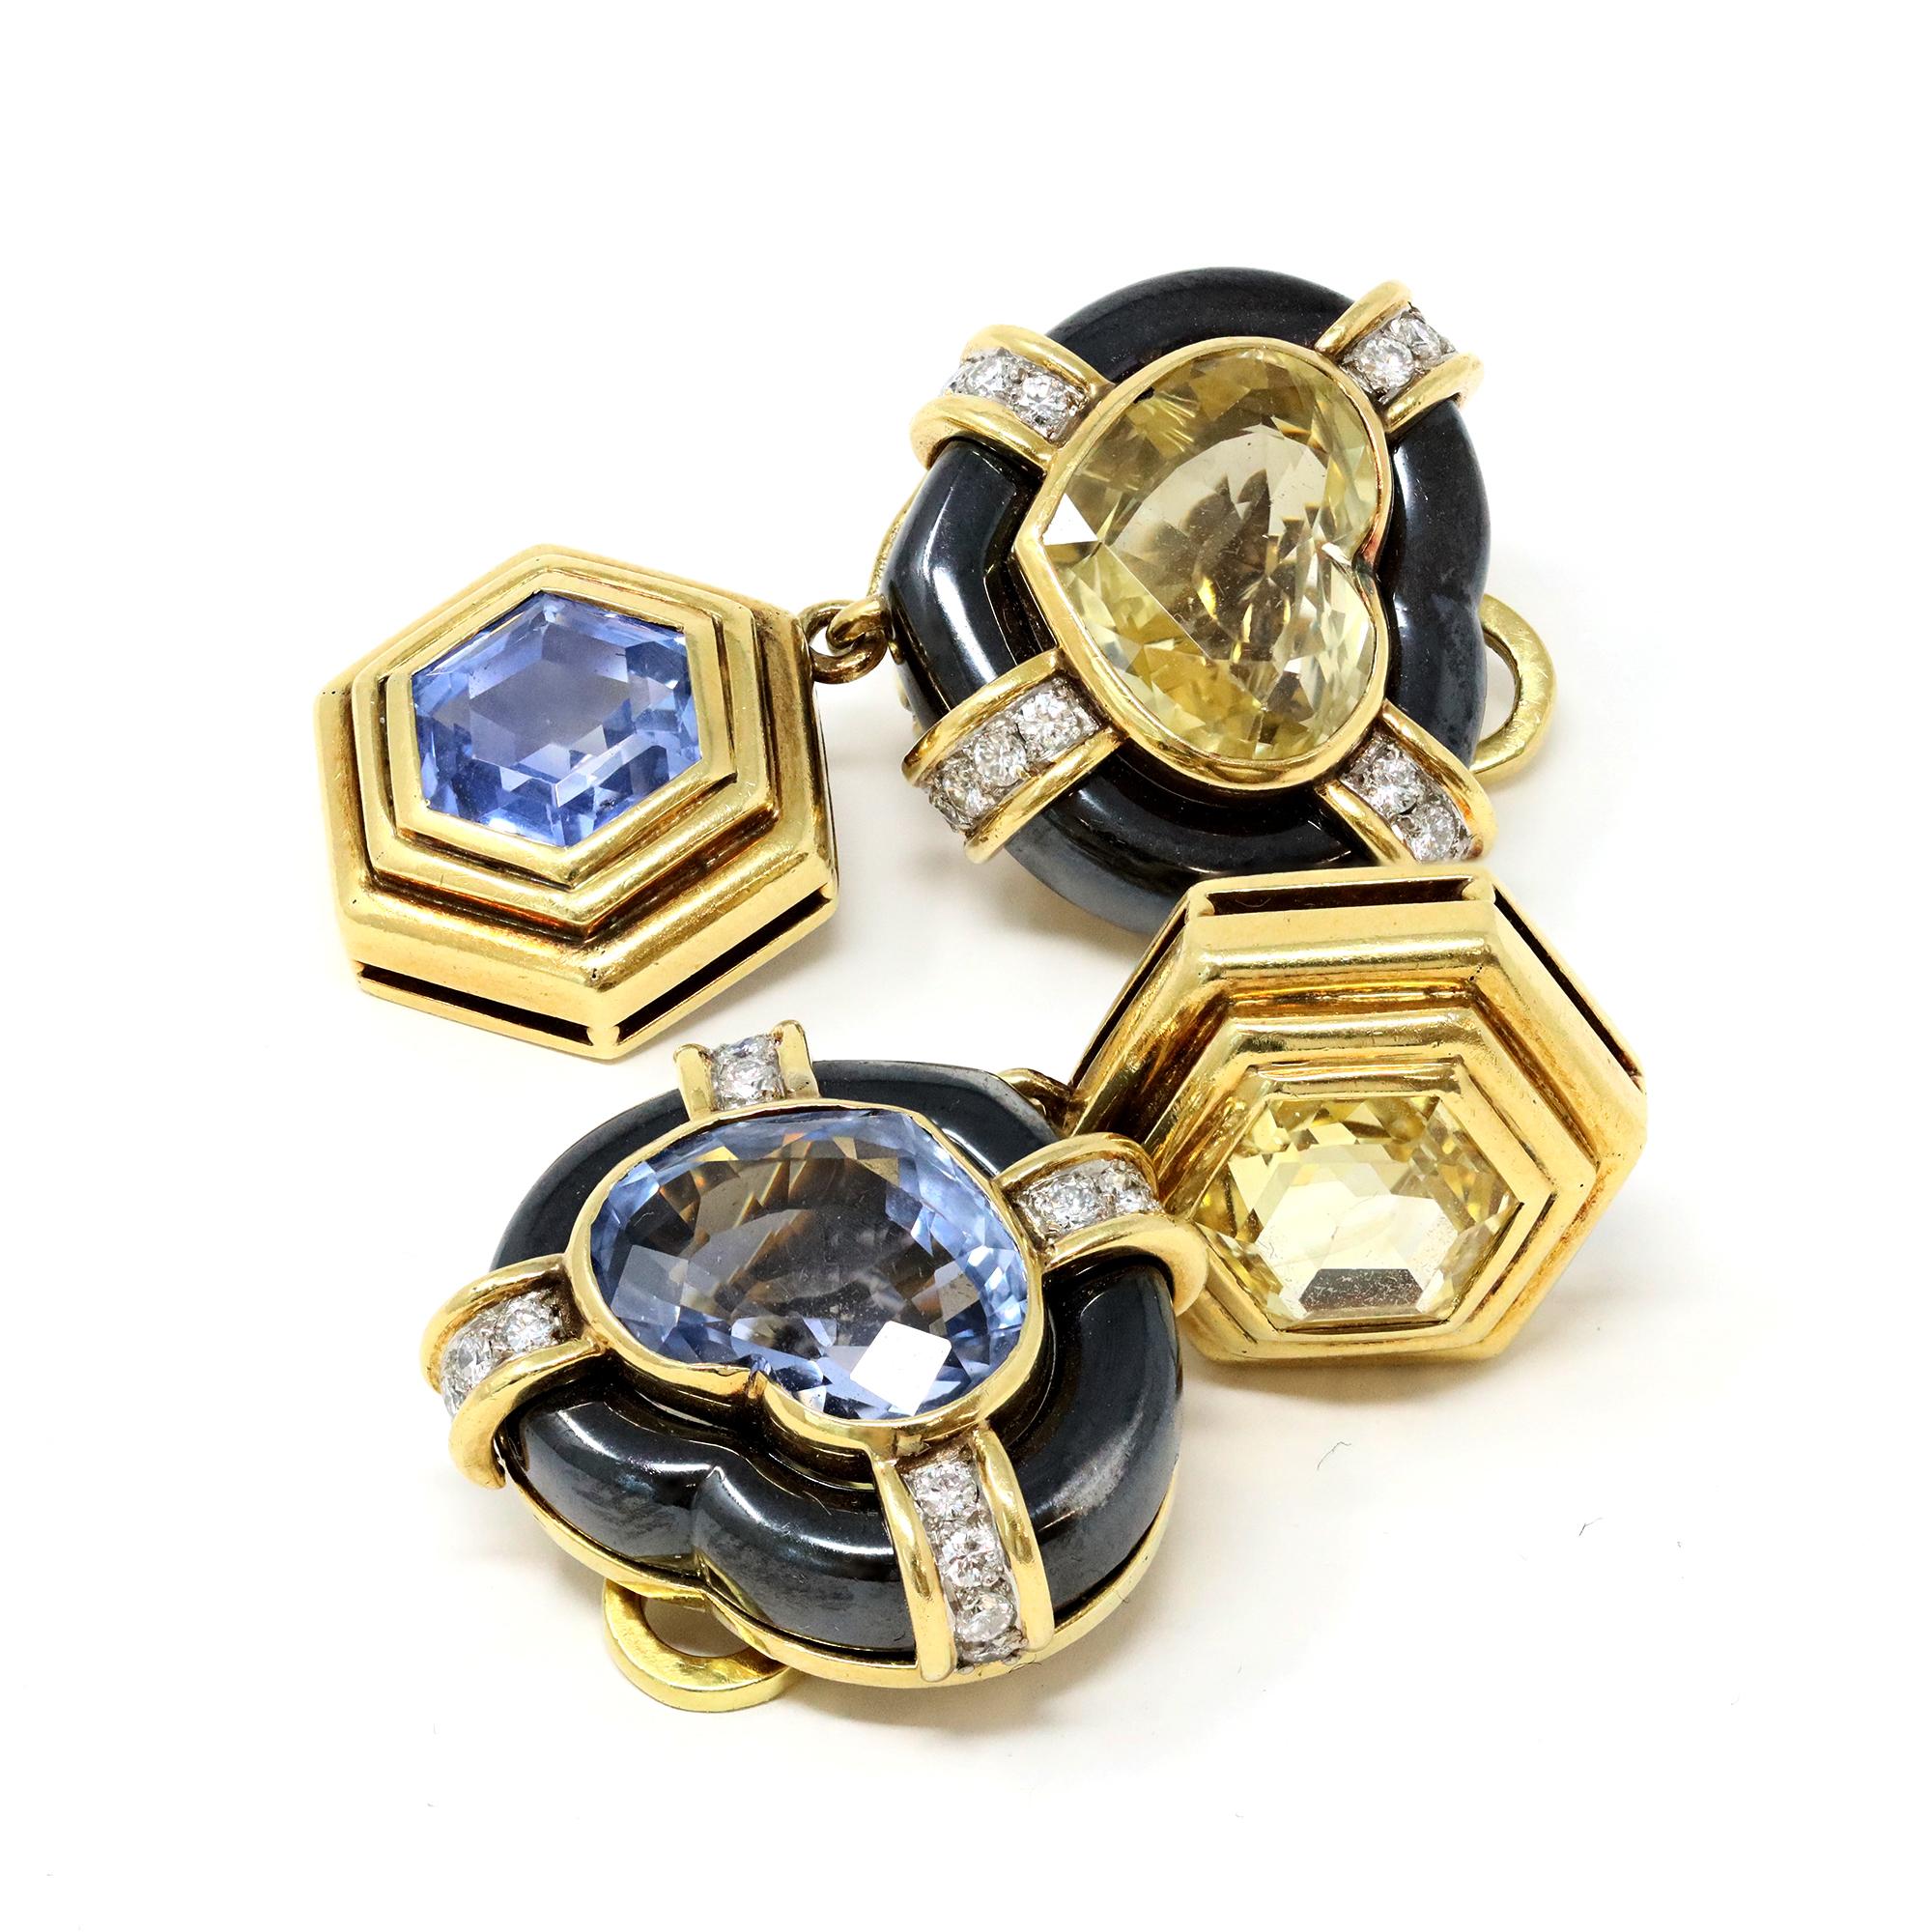 Pair of 18 karat yellow gold, yellow and blue sapphire, hematite and diamond ear-clips, the tops designed as hearts set with heart-shaped yellow and blue sapphires, within hematite frames accented by round diamonds weighing approximately 0.60 carat,